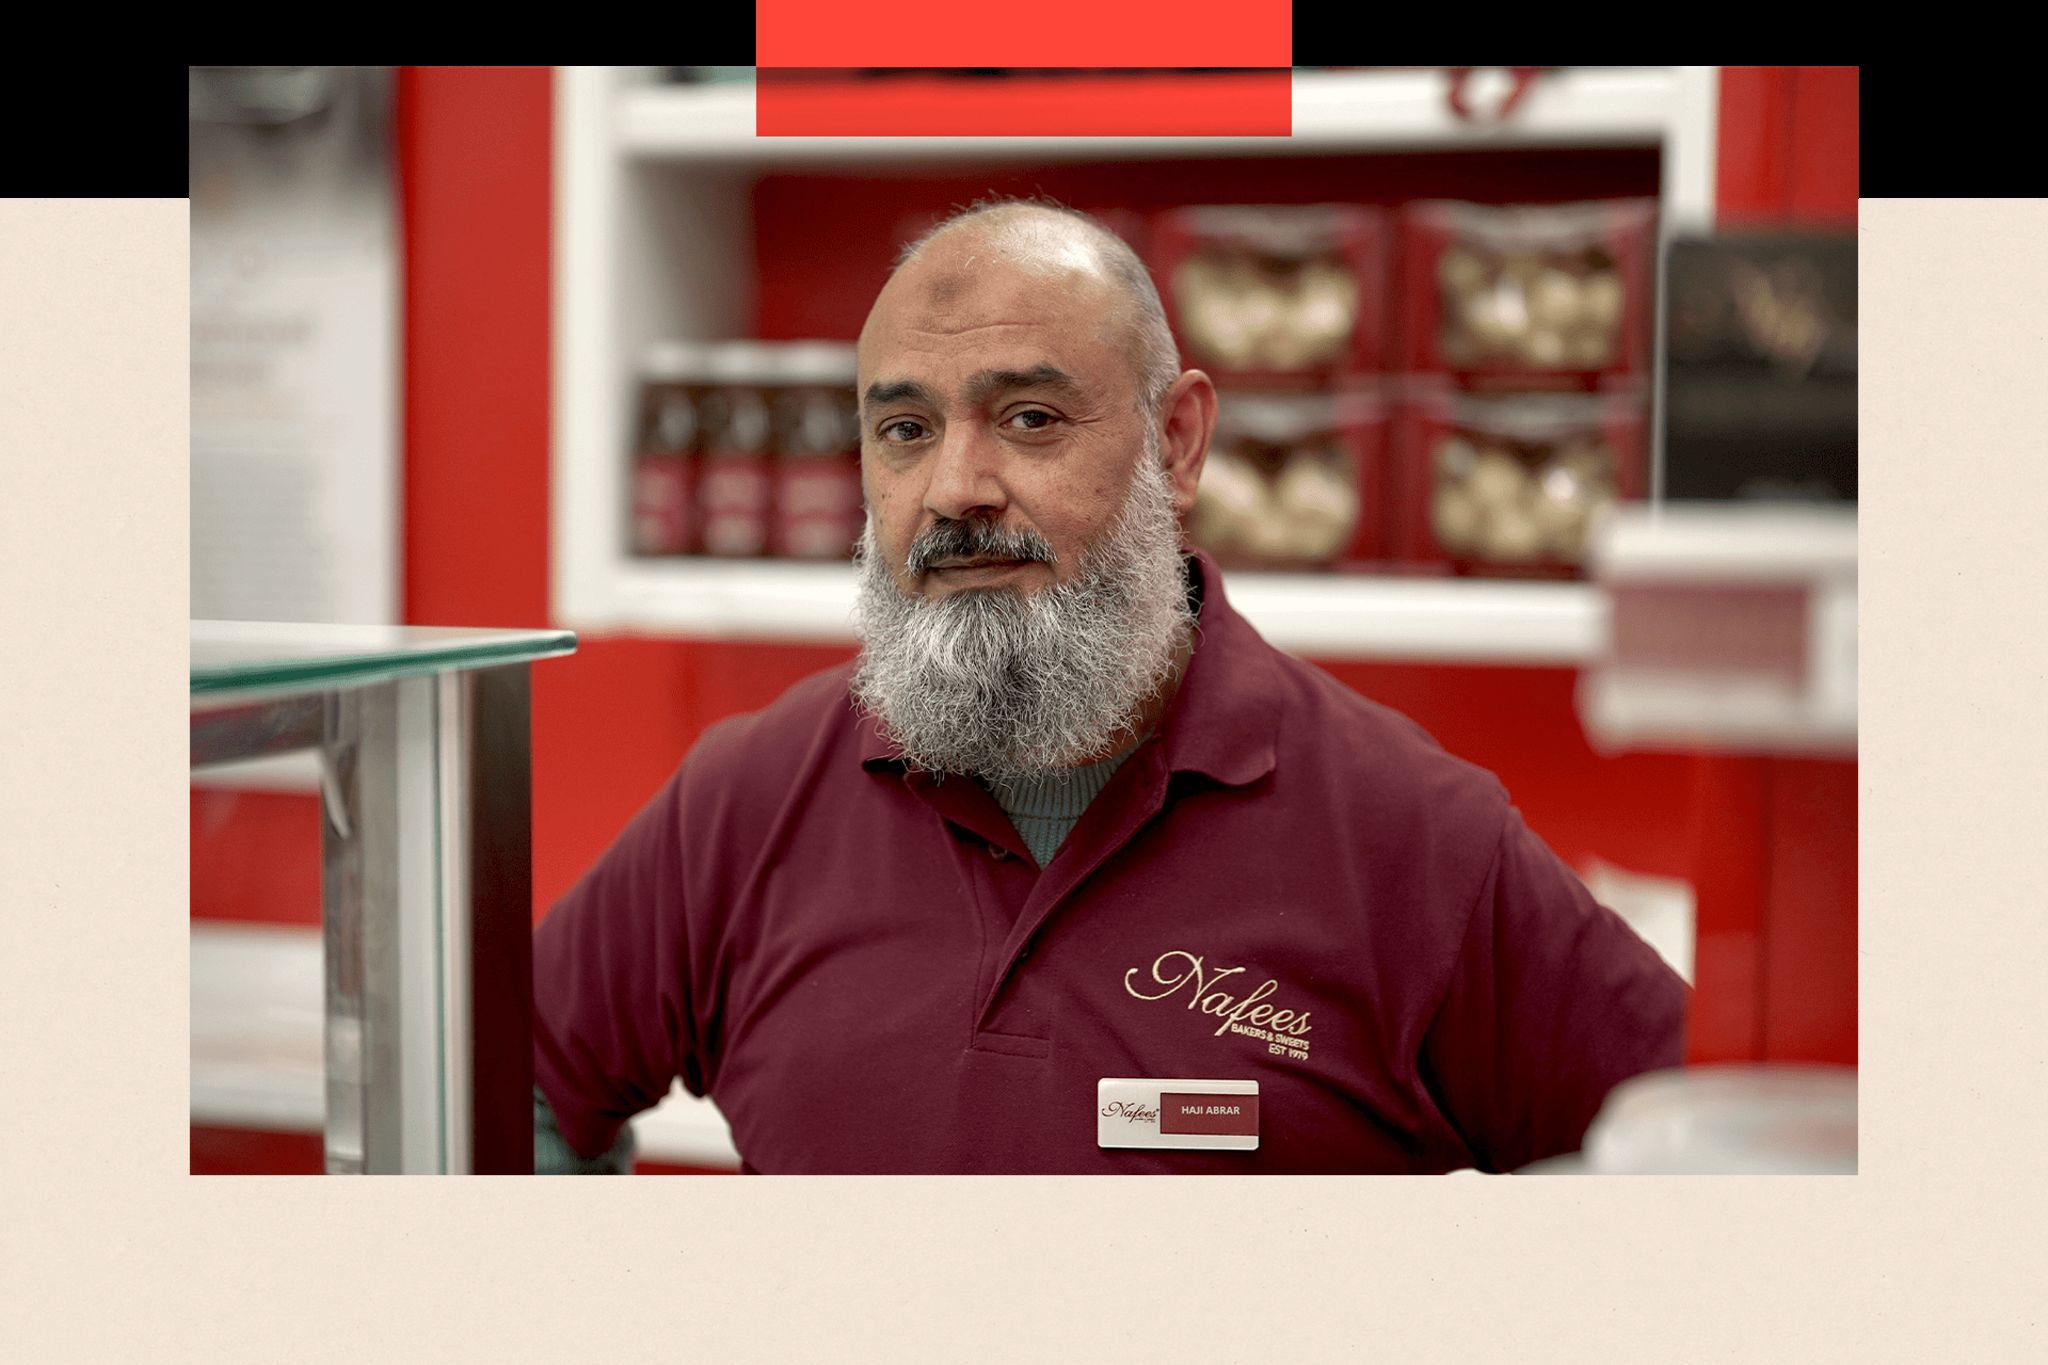 Haji, a man with a beard and a t-shirt, stands in a shop